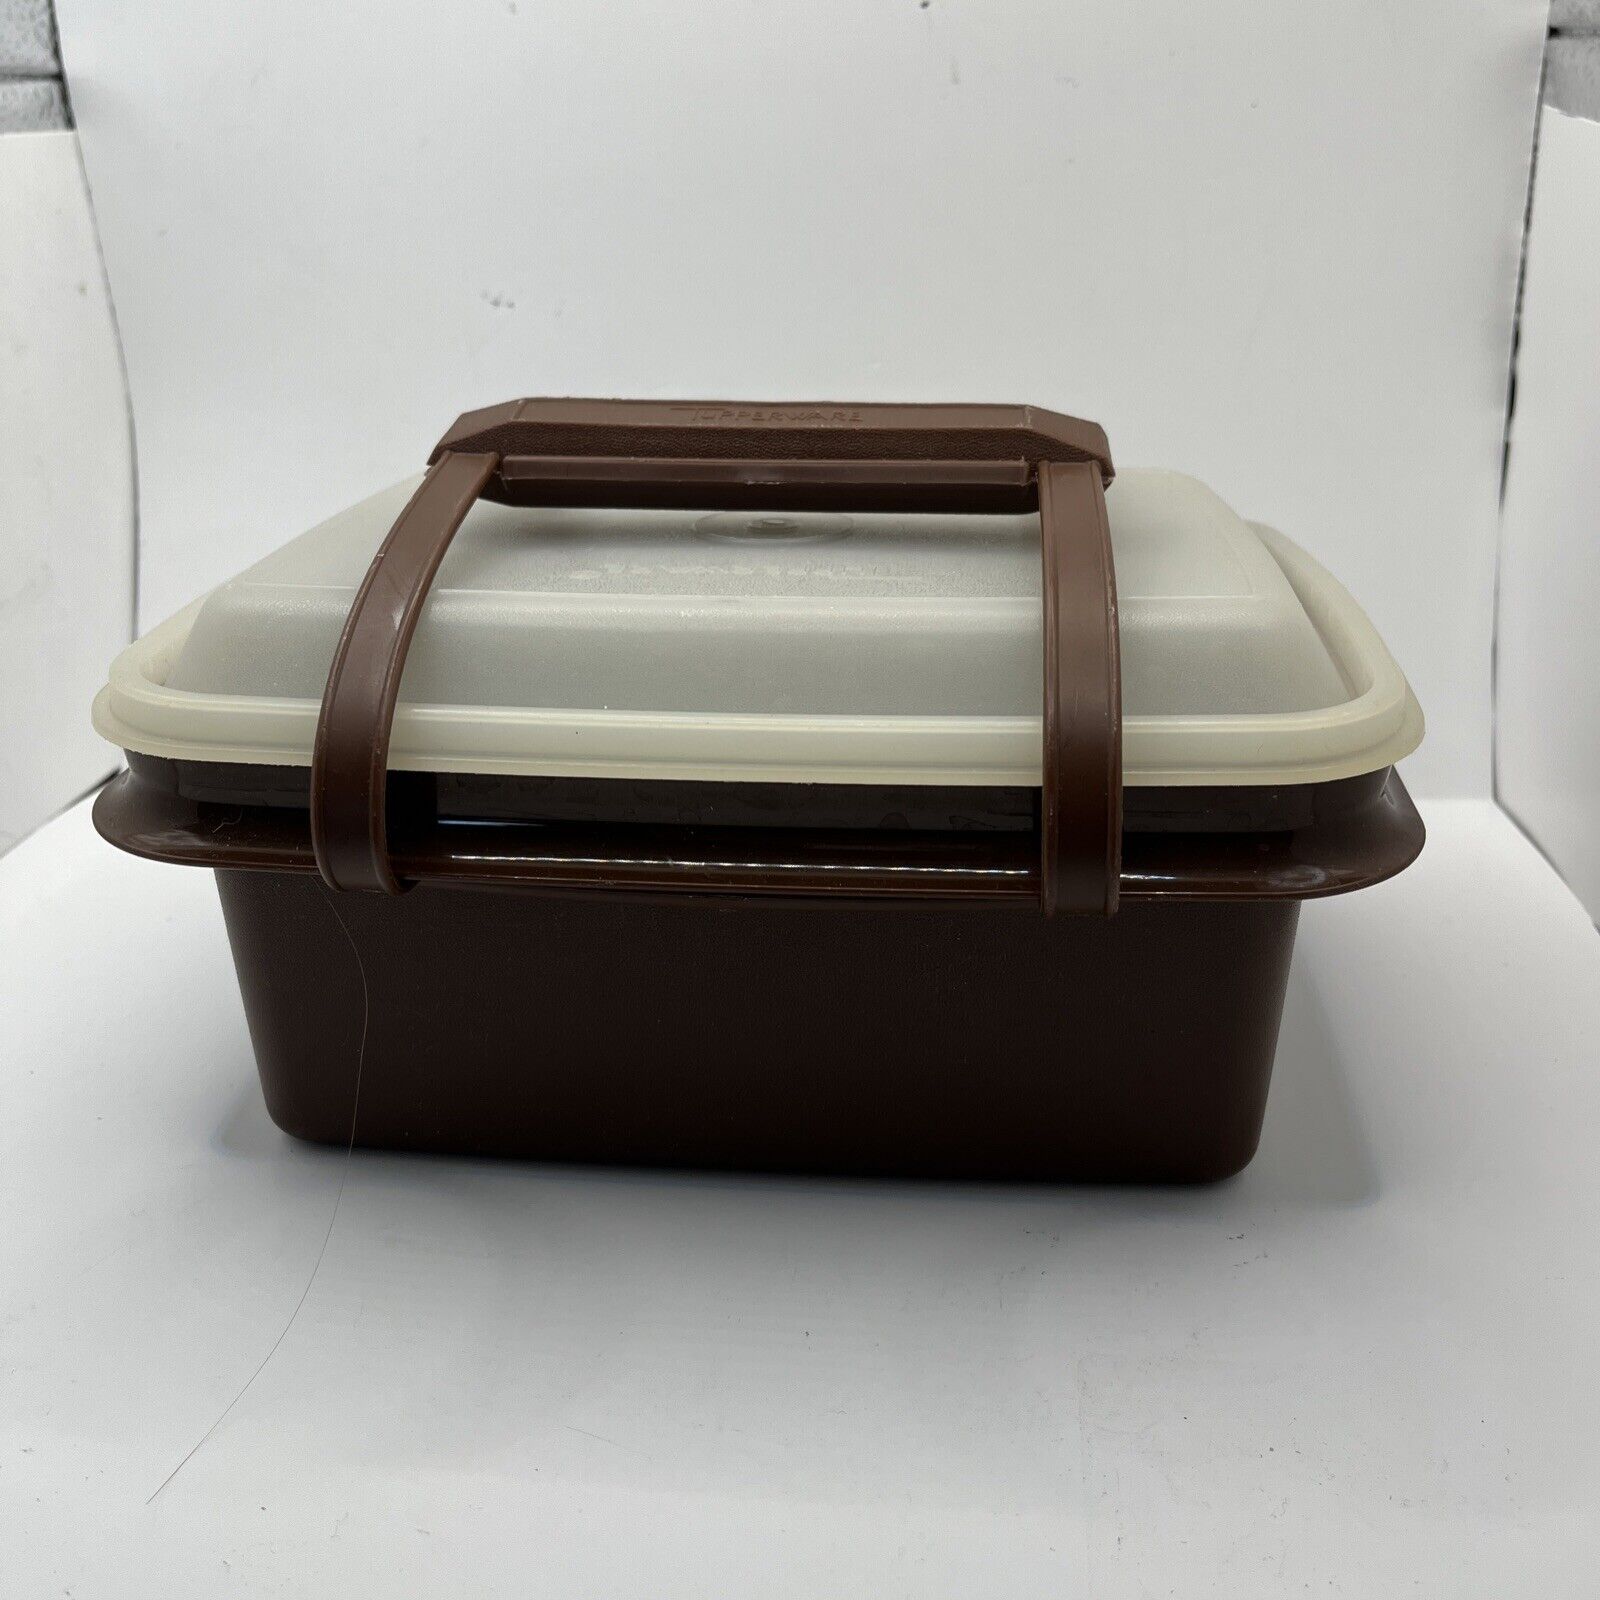 Vintage Tupperware Ice Cream Keeper Freeze N Save Container with Lid Brown 1254